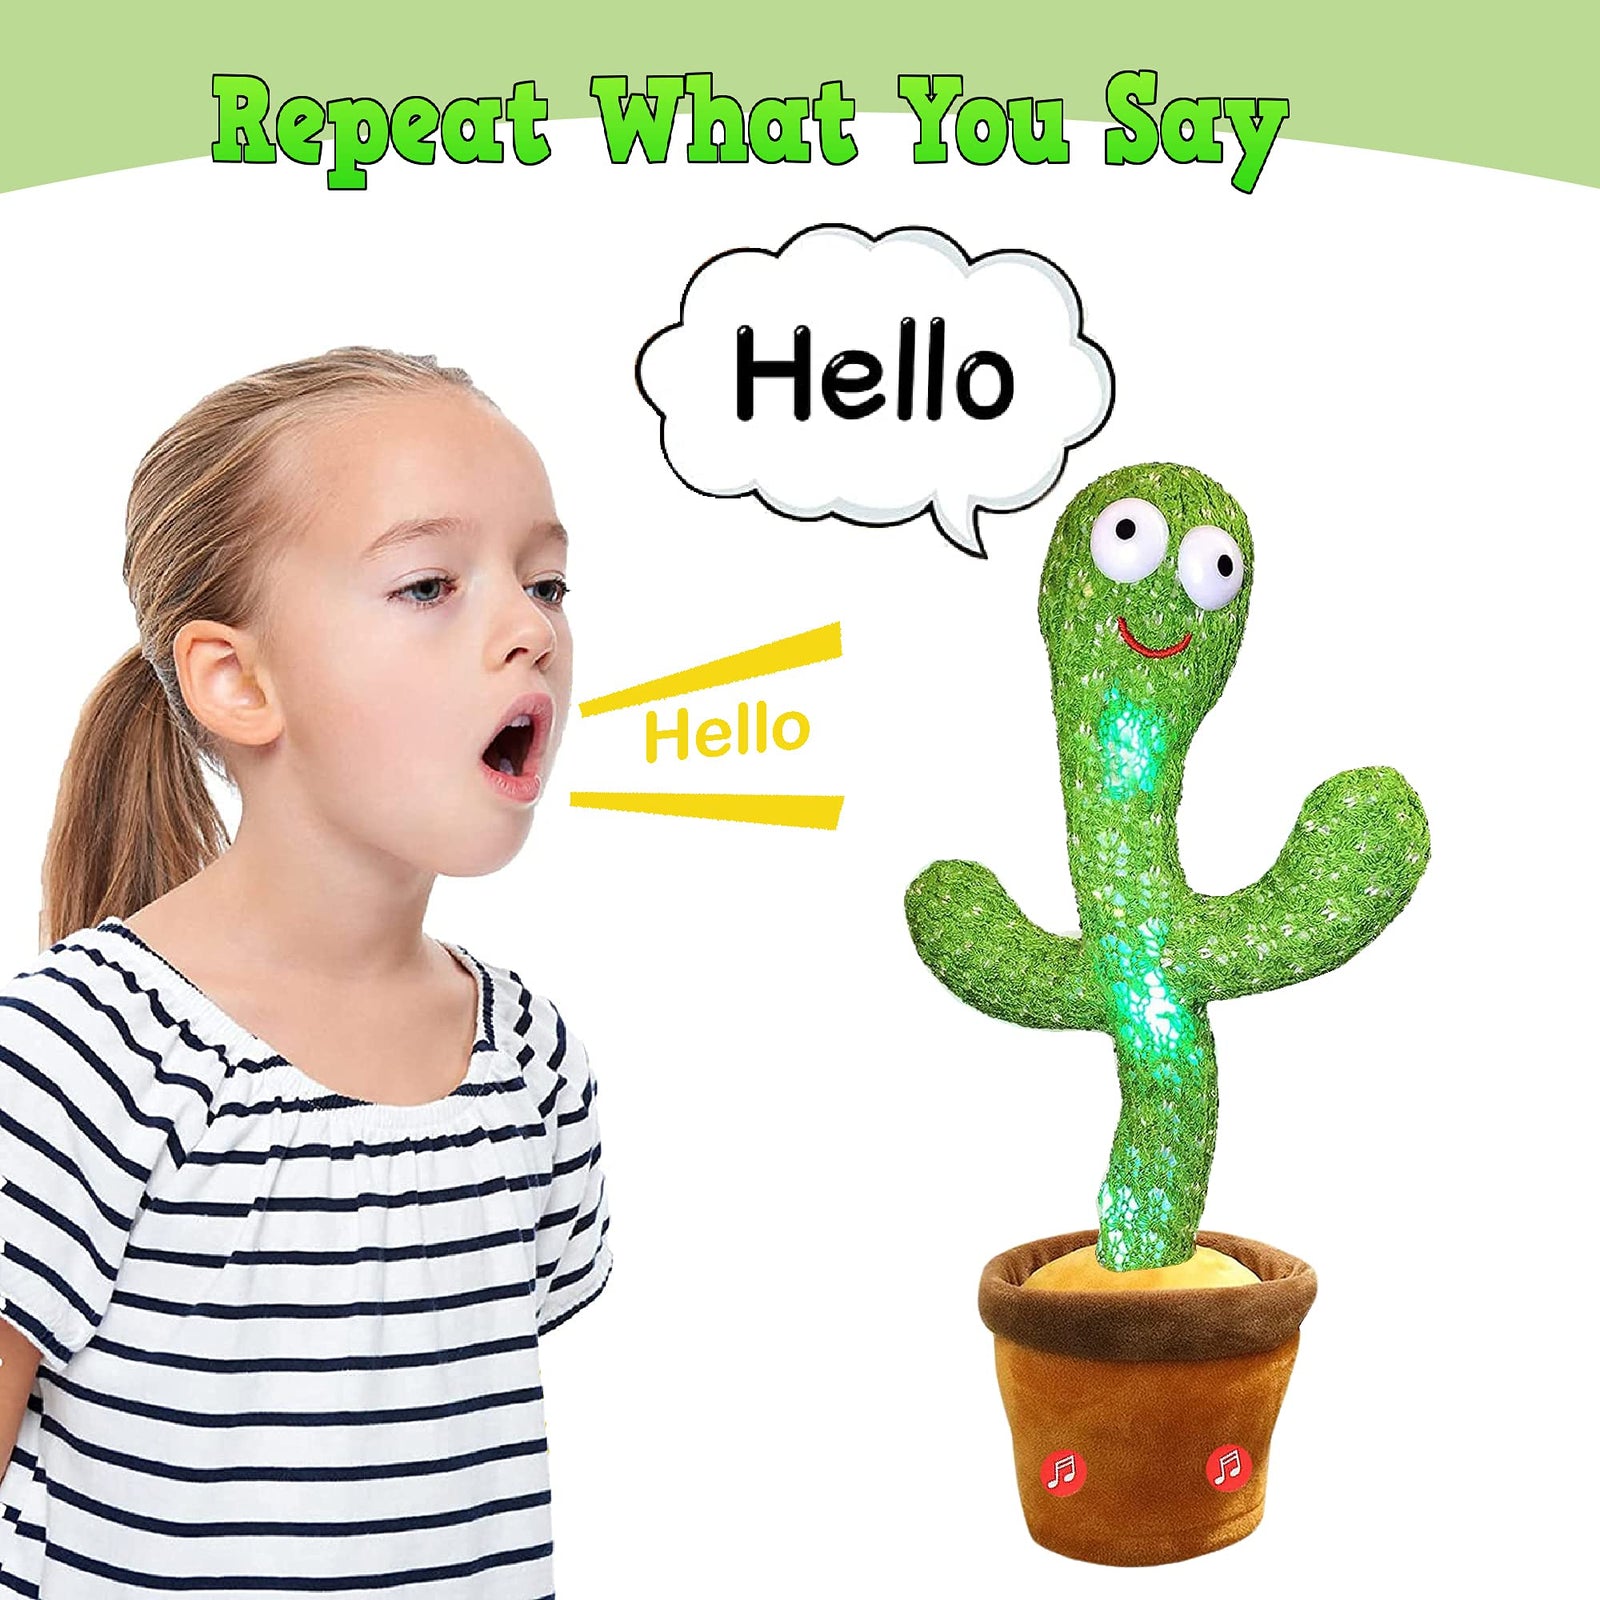 M MITLINK Dancing Cactus Repeats What You Say,Electronic Plush Toy with Lighting,Singing Cactus Recording and Repeat Your Words for Education Toys,Singing Cactus Toy, Cactus Plush Toy (Green)